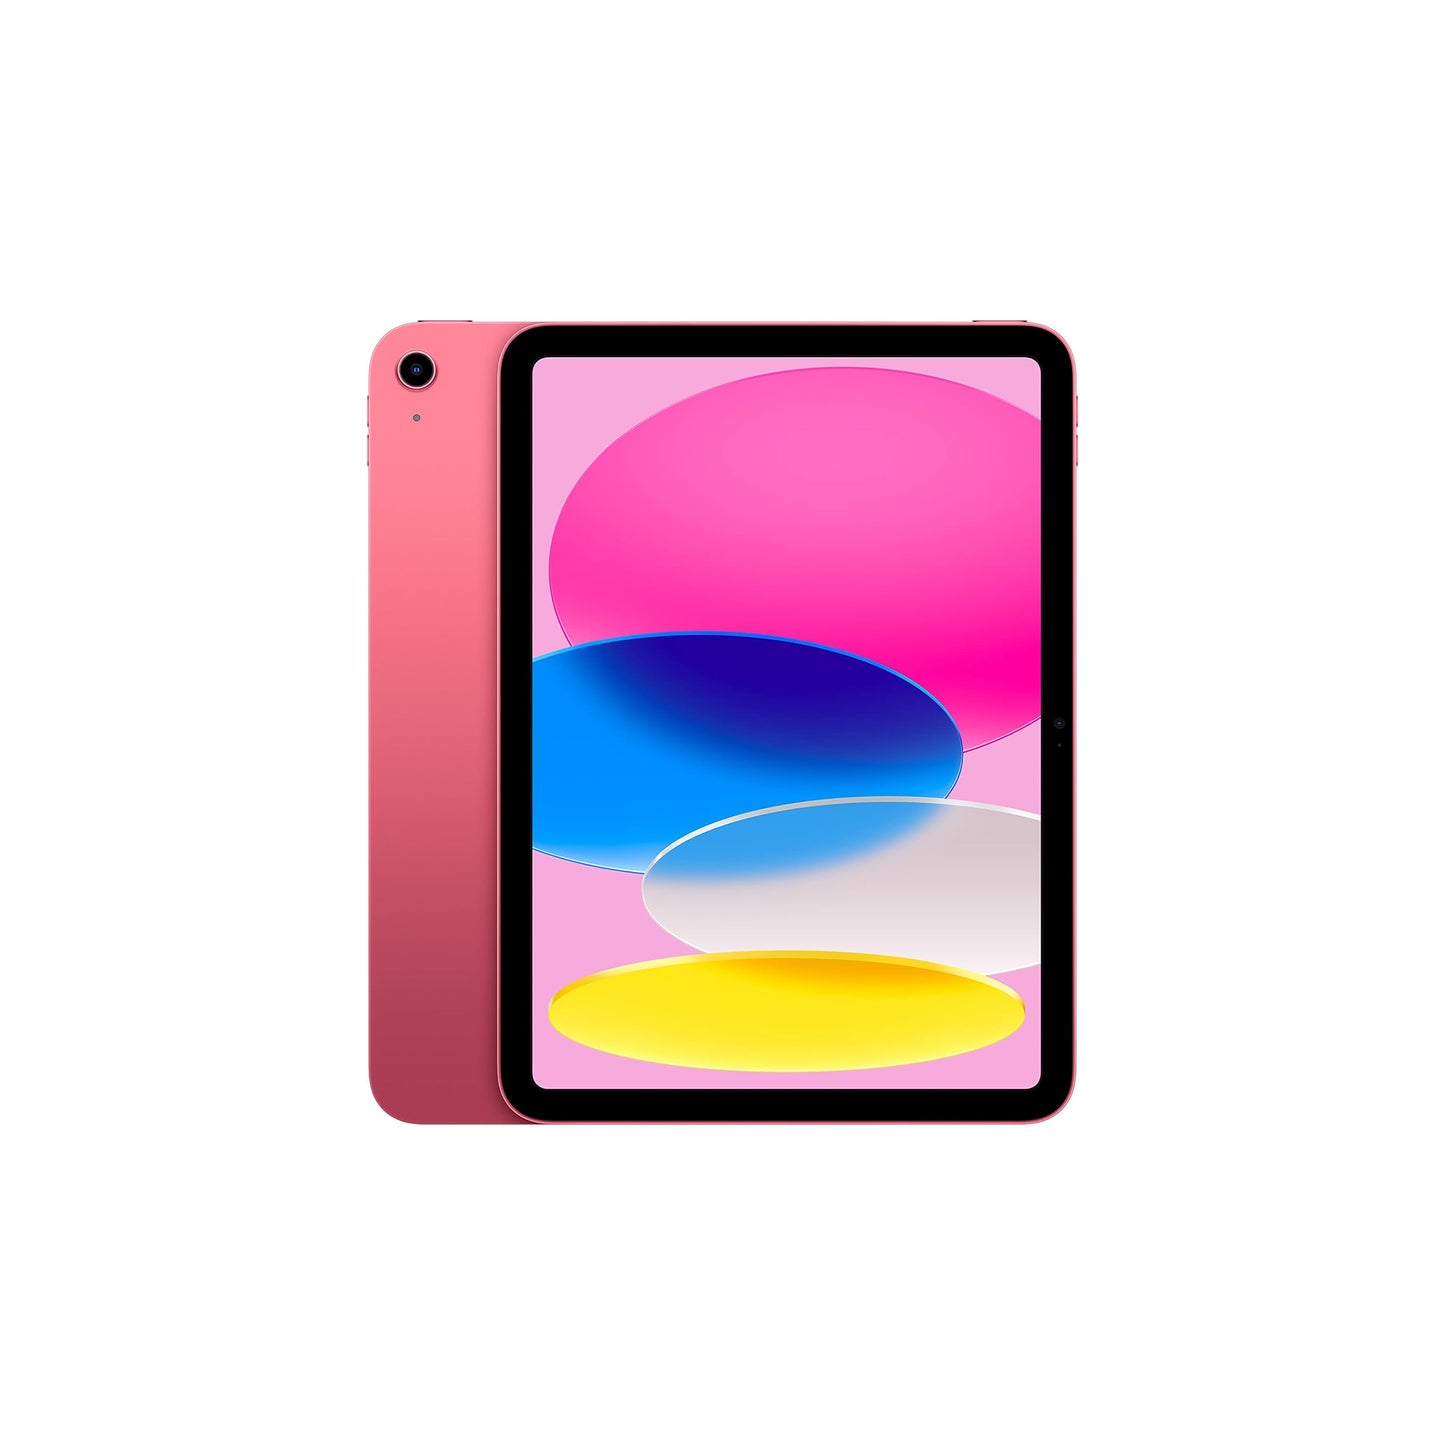 Apple iPad (10th Generation): with A14 Bionic chip, 10.9-inch Liquid Retina Display, 256GB, Wi-Fi 6 + 5G Cellular, 12MP front/12MP Back Camera, Touch ID, All-Day Battery Life – Yellow